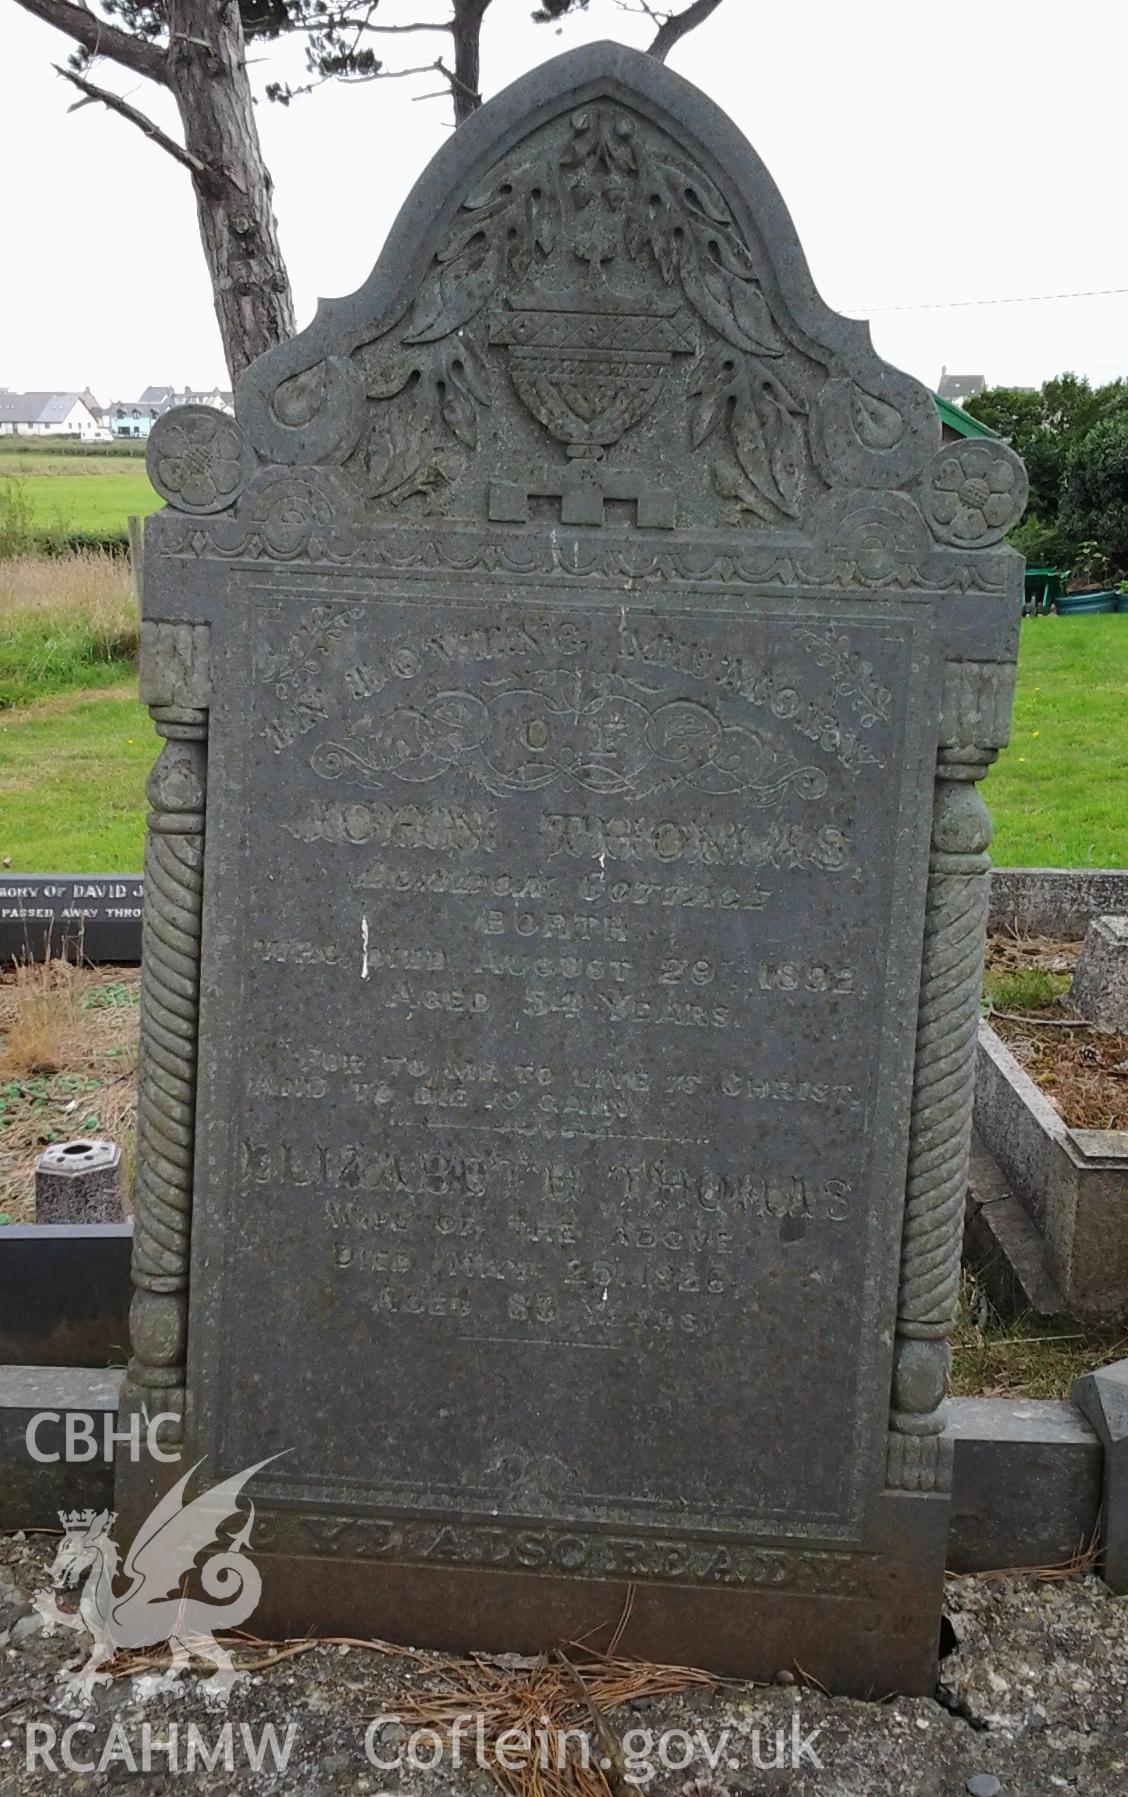 Memorial to John Thomas of London Cottage, Borth, died August 29 1892